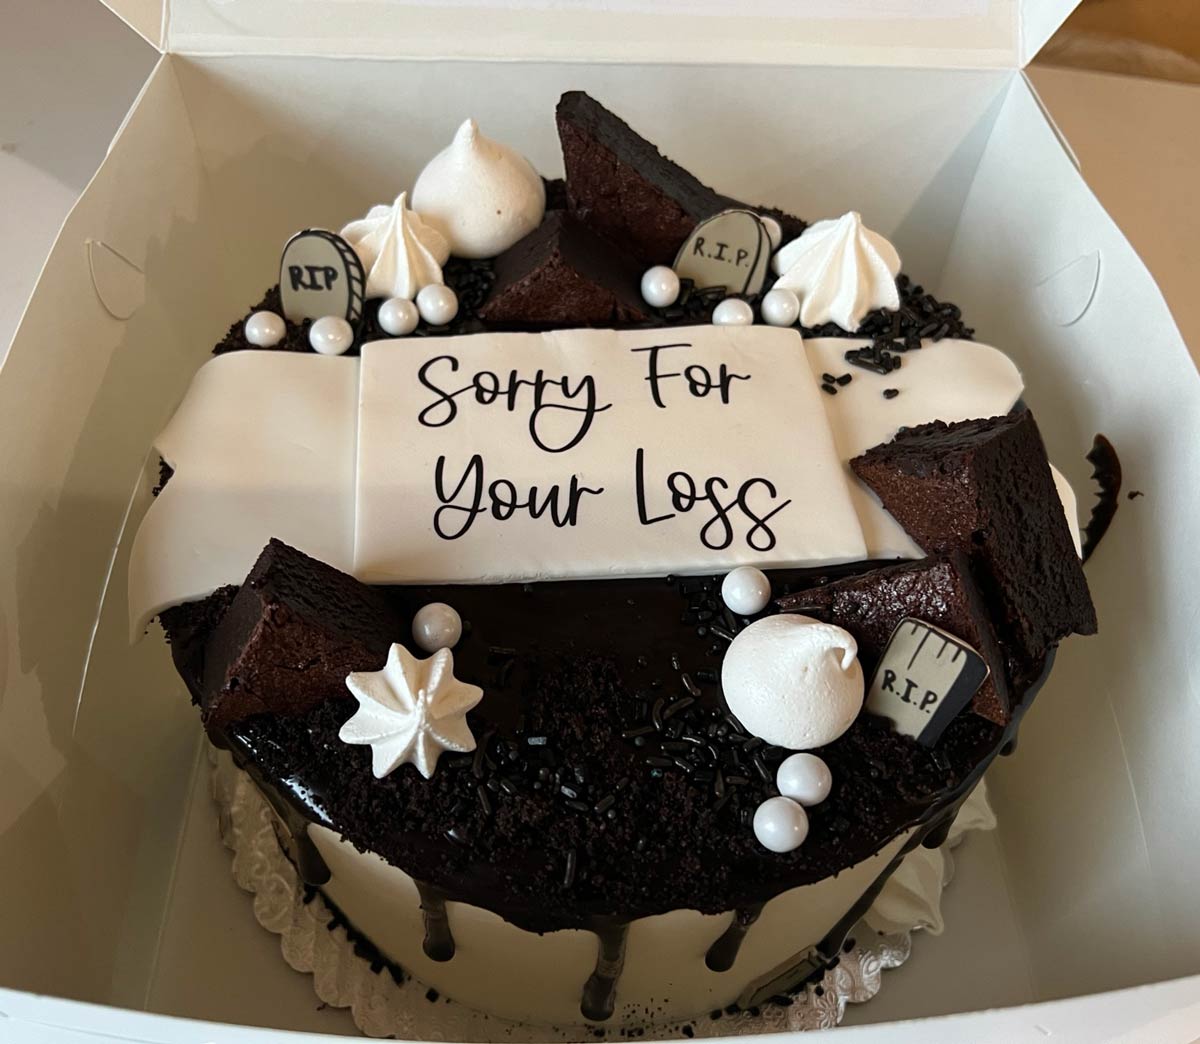  Today is my last day of work at this job, so I brought in a cake for everyone